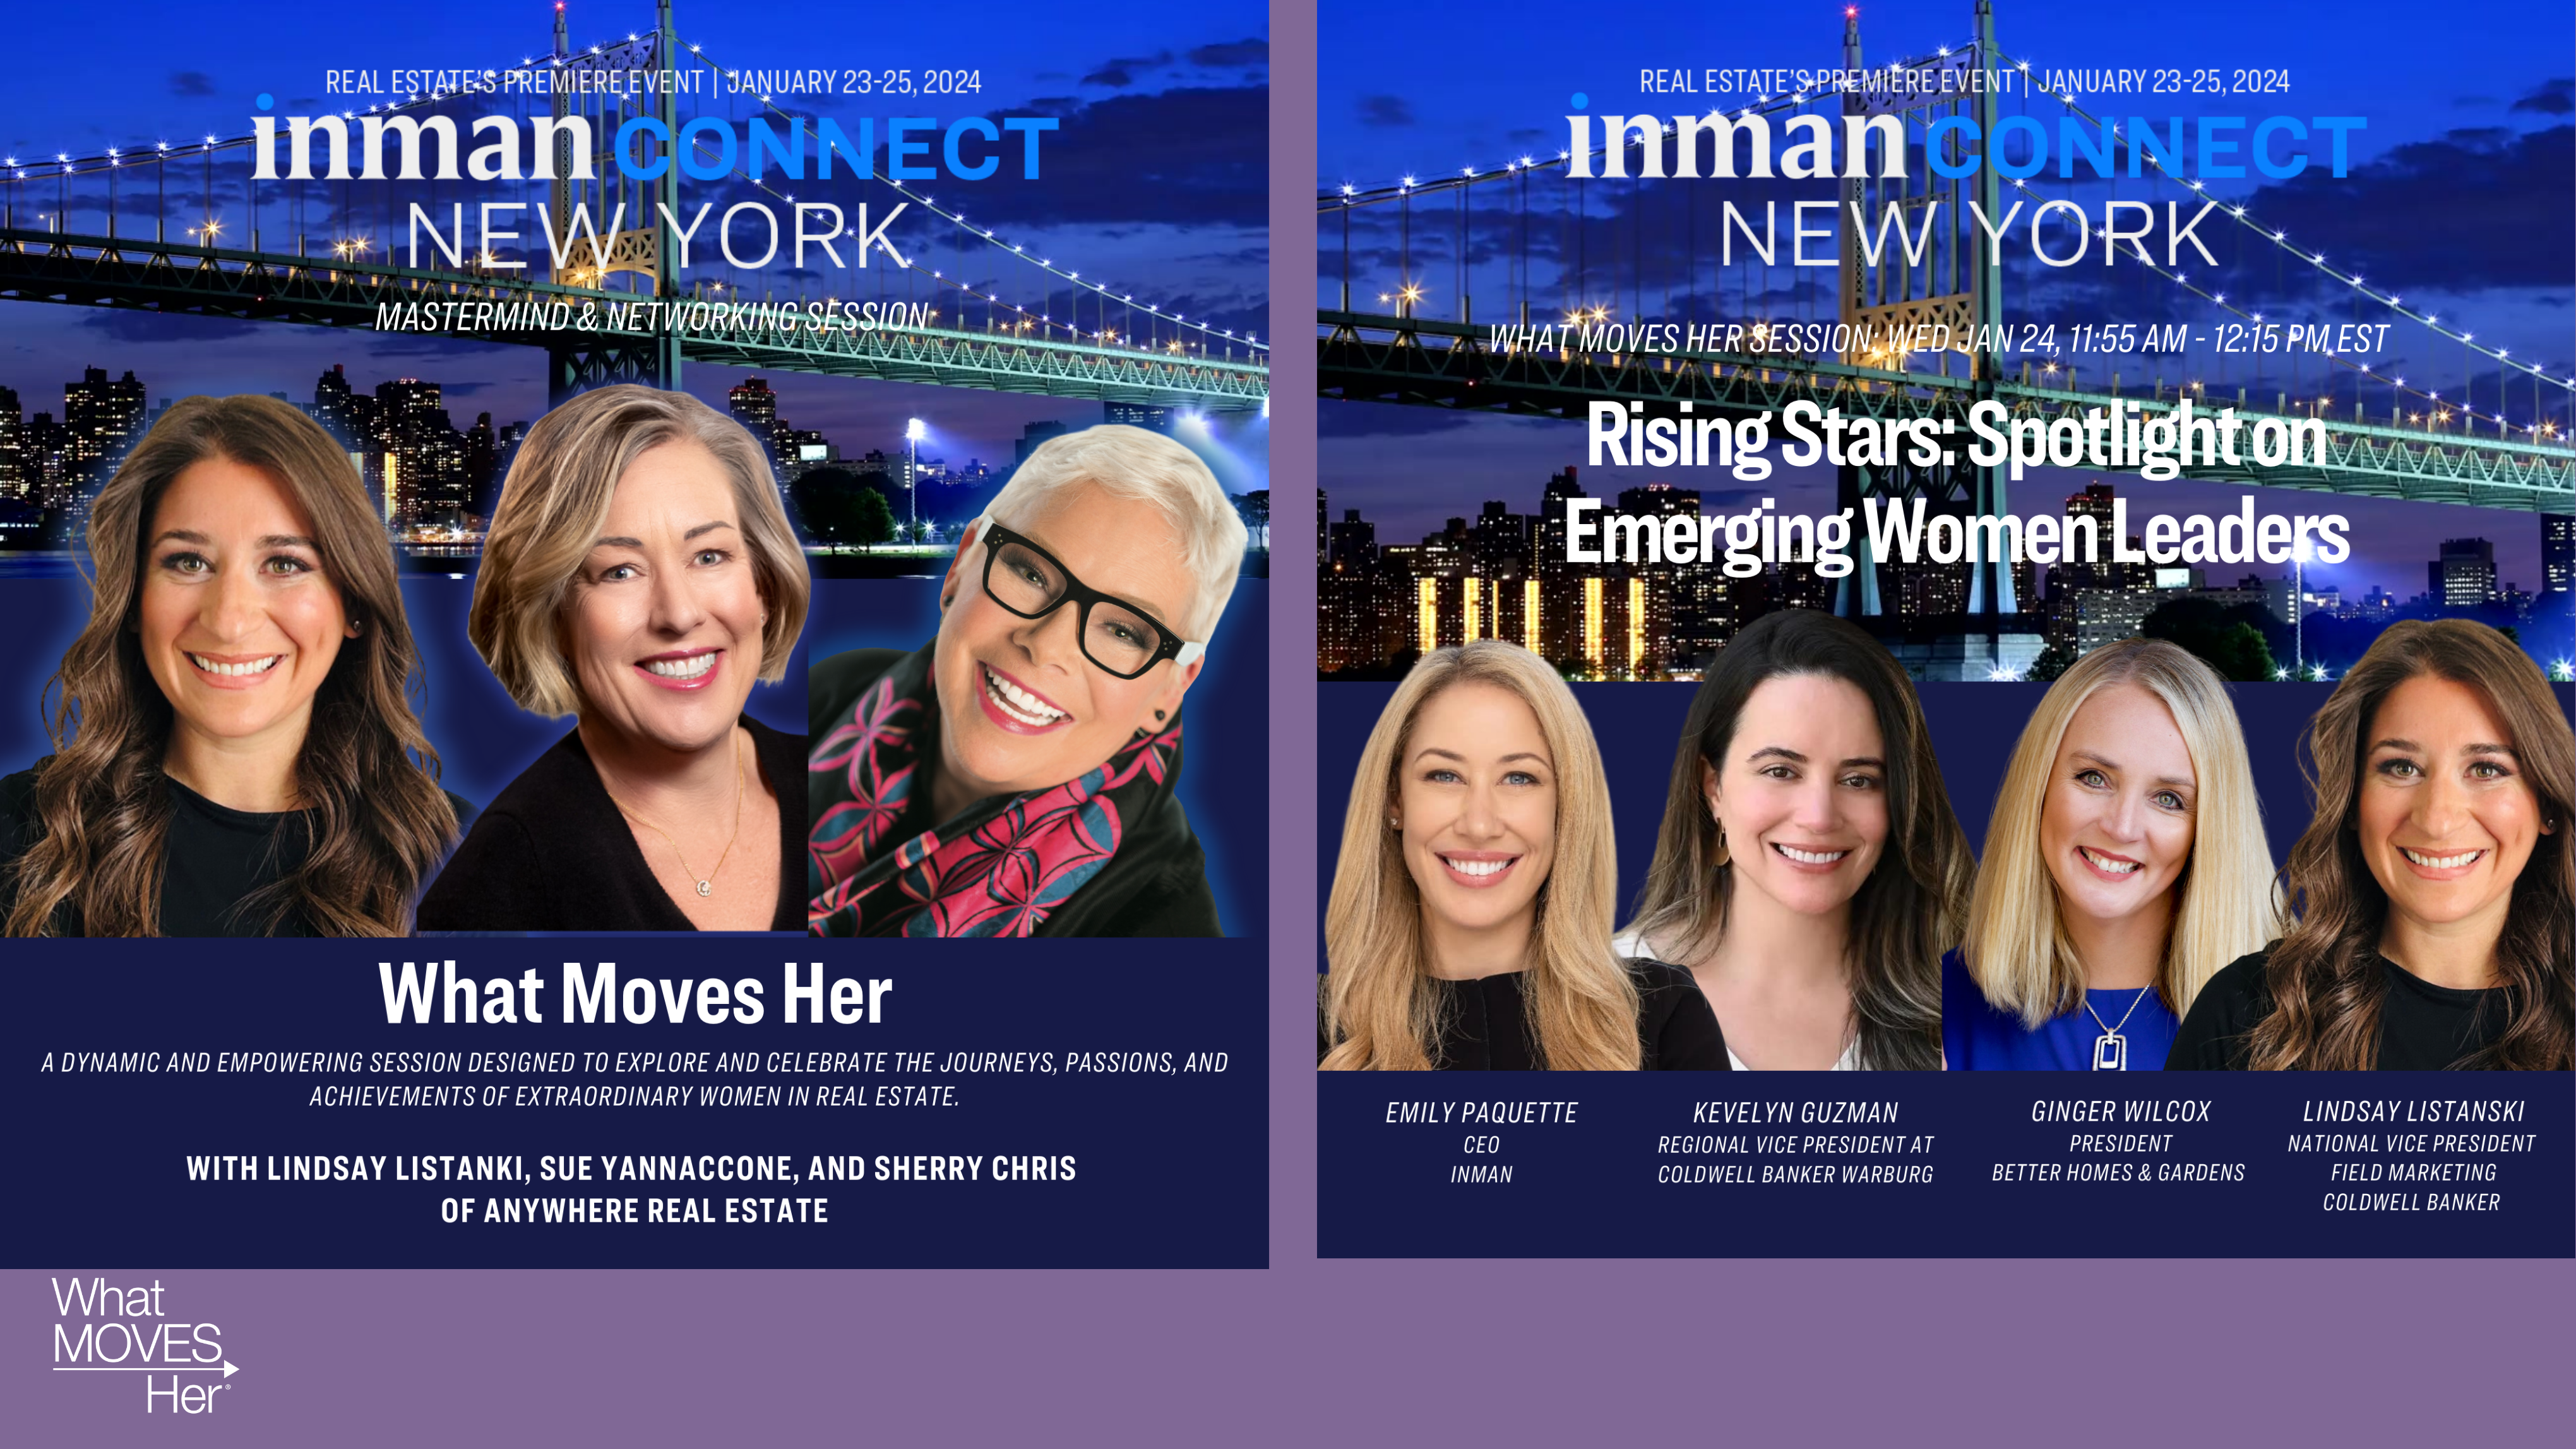 What Moves Her is going to Inman Connect New York ! Are you going?